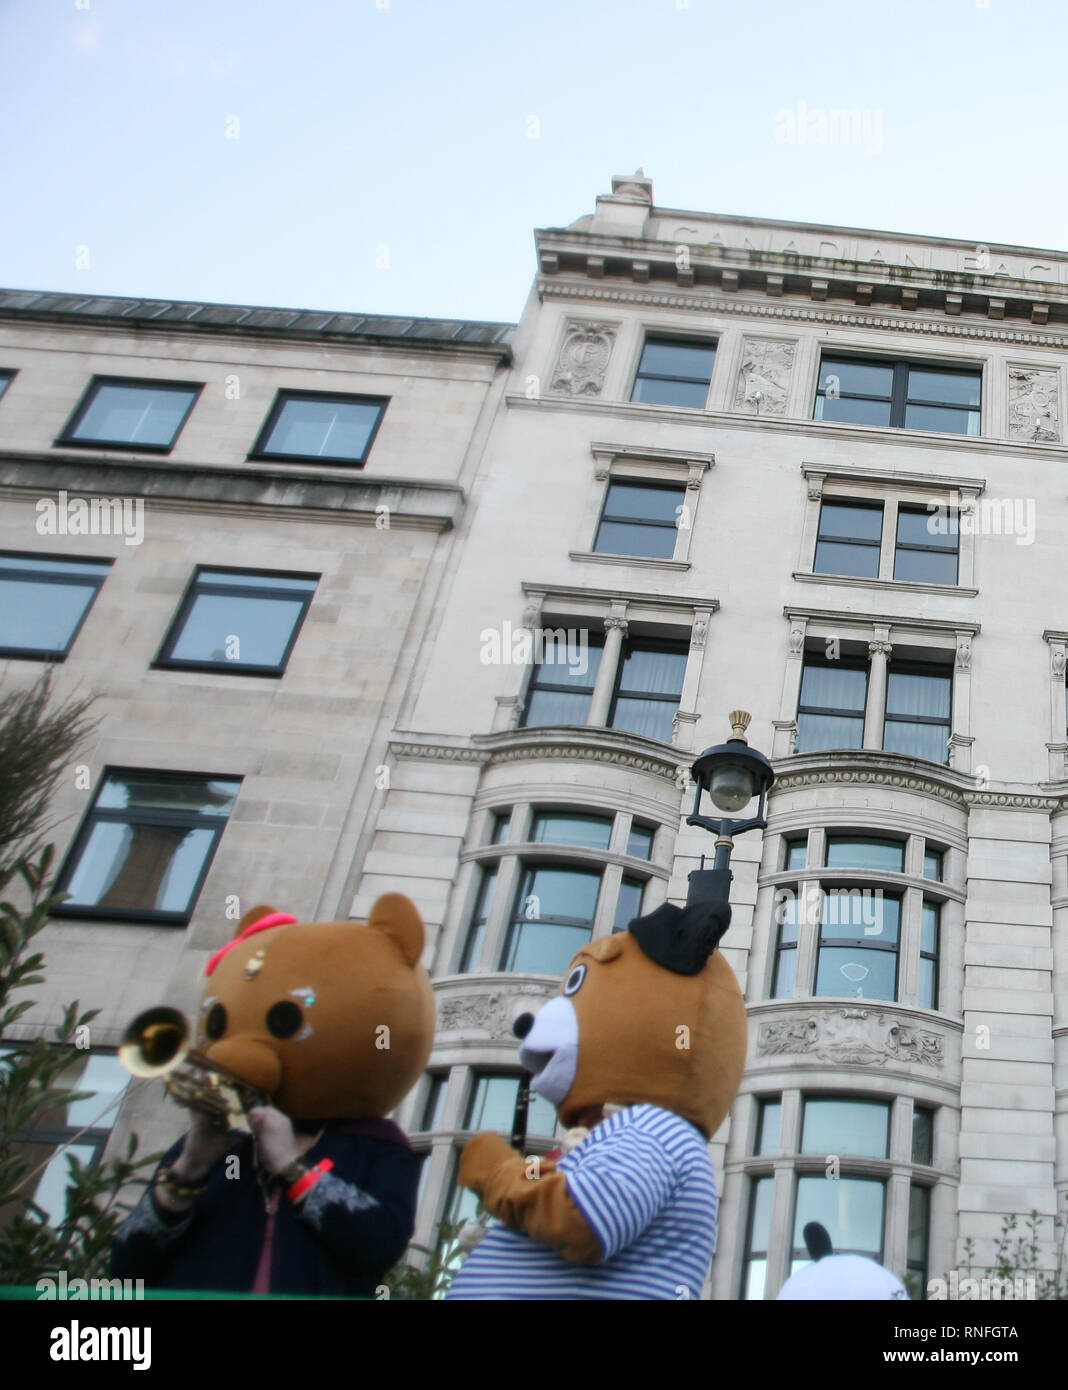 England, London, Westminster, Piccadilly,  New Year's Day Parade, Teddy Bear Floats. Stock Photo